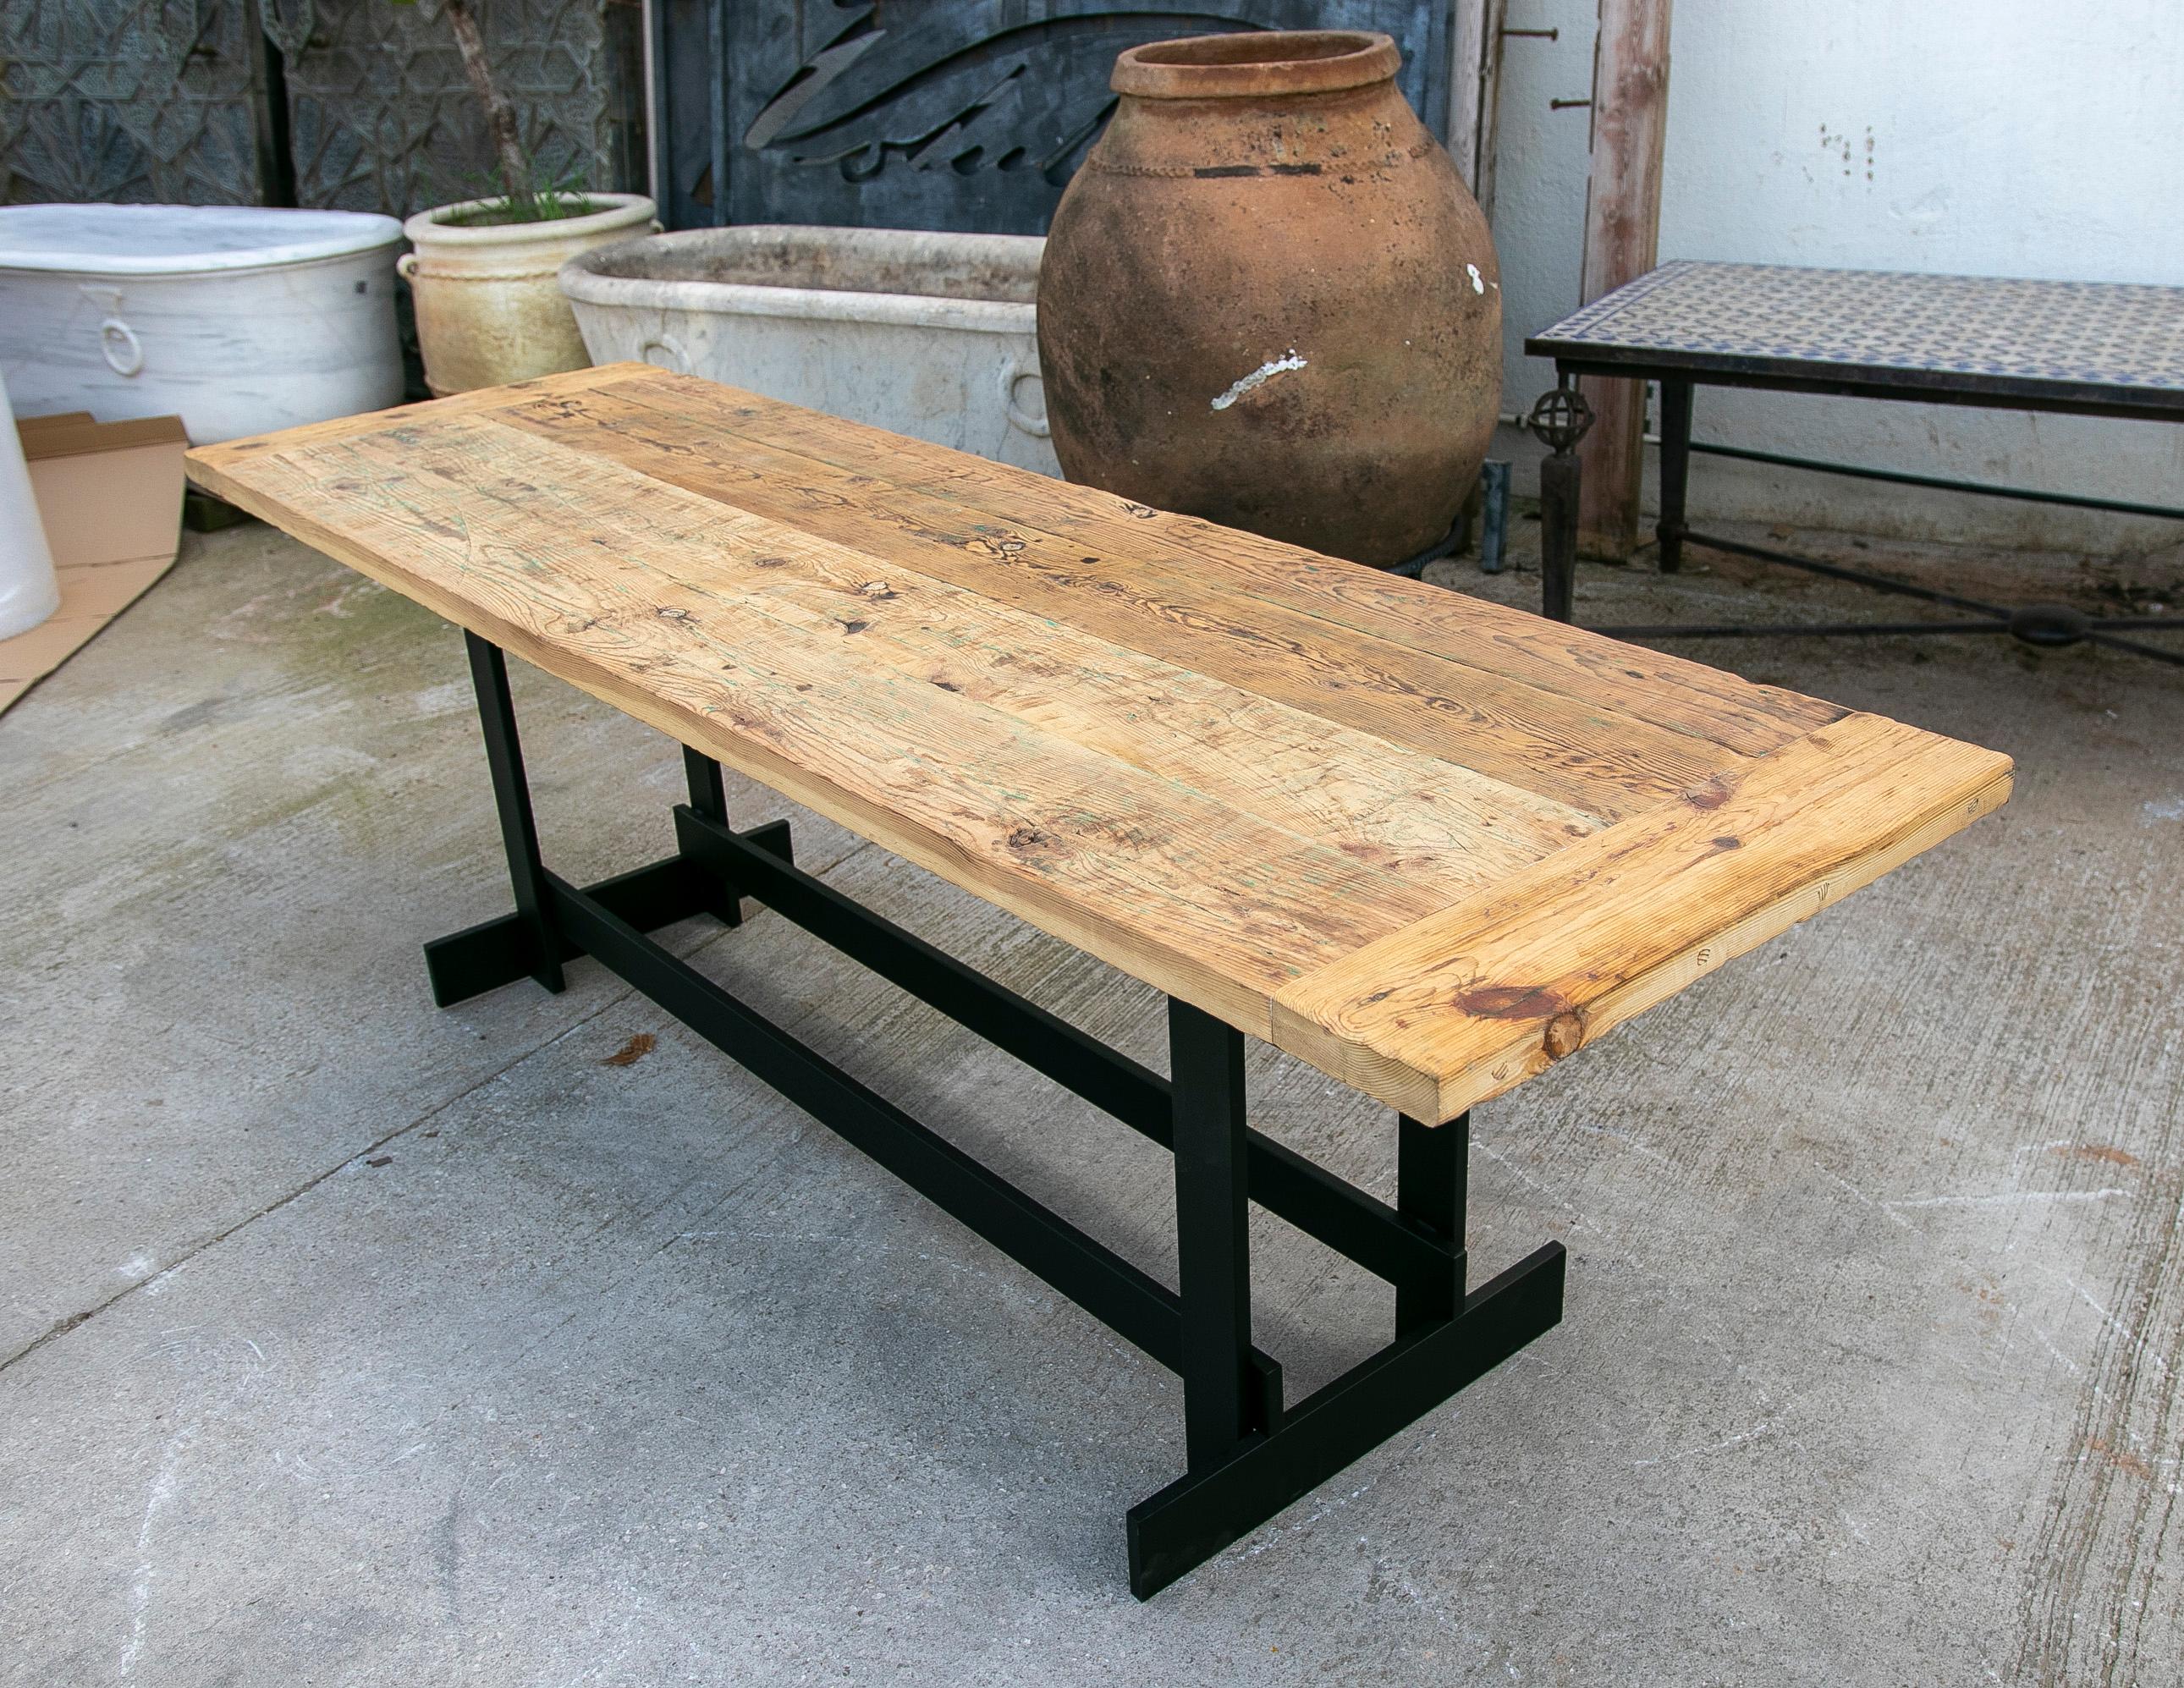 Console table with iron base and rustic wooden table top.